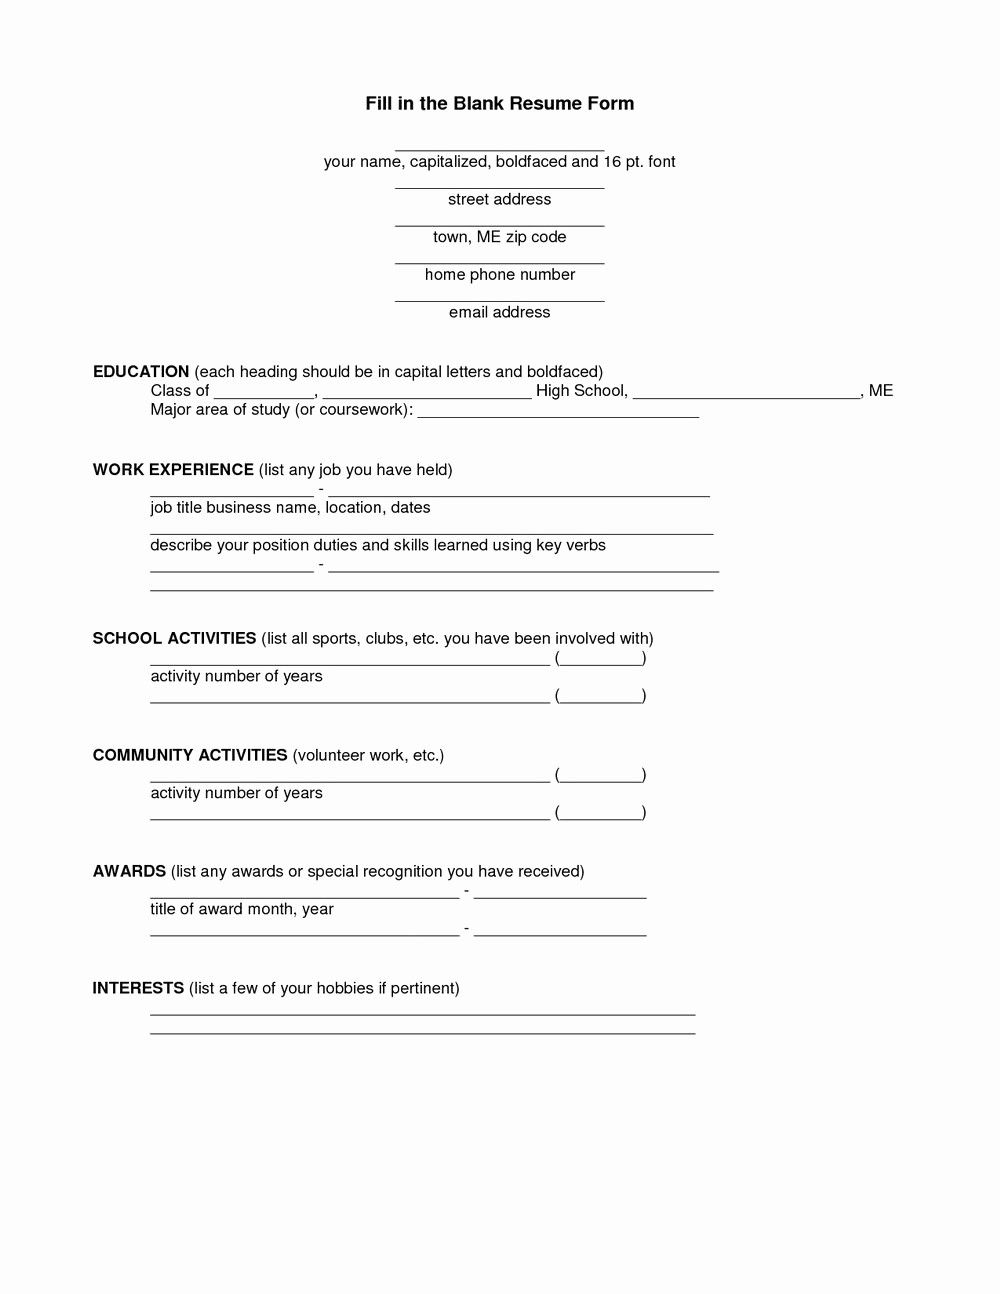 Resumes Fill In the Blanks Best Of Blank Resume form to Fill Out Resumes 1046